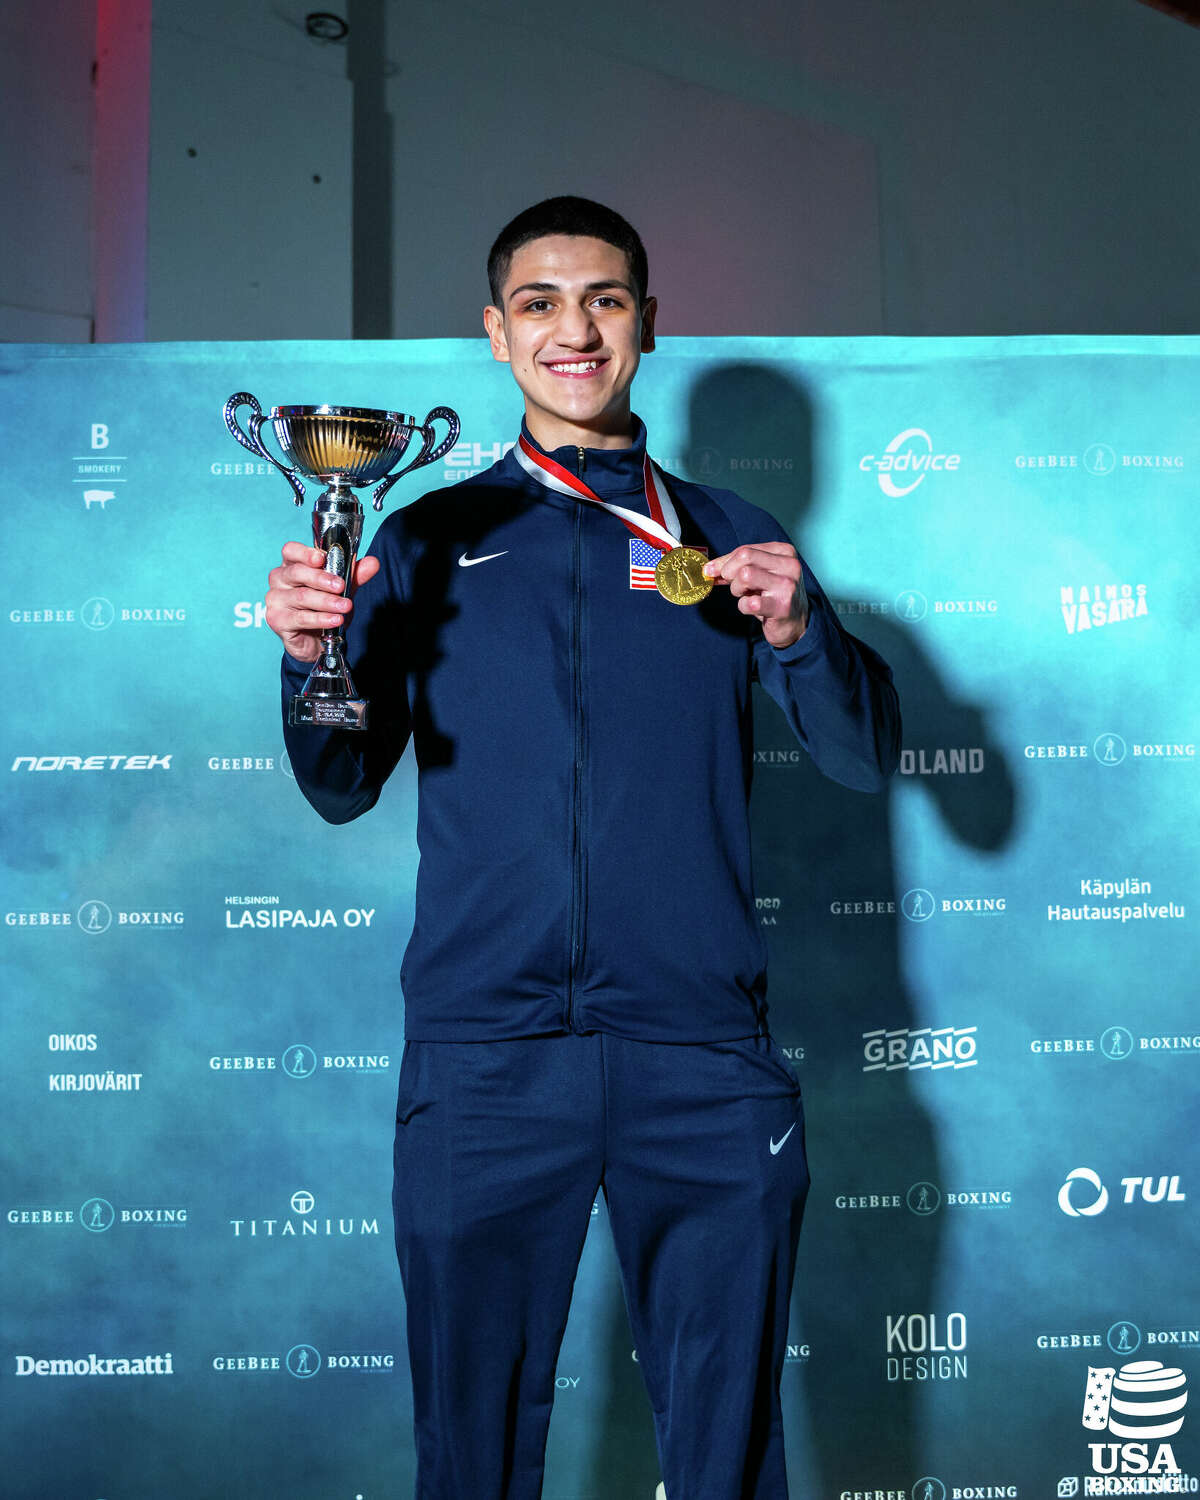 Laredo's Emilio Garcia won an international championship with USA Boxing on Sunday, April 16 earning the gold medal at the 41st annual GeeBee Tournament in Helsinki, Finland.